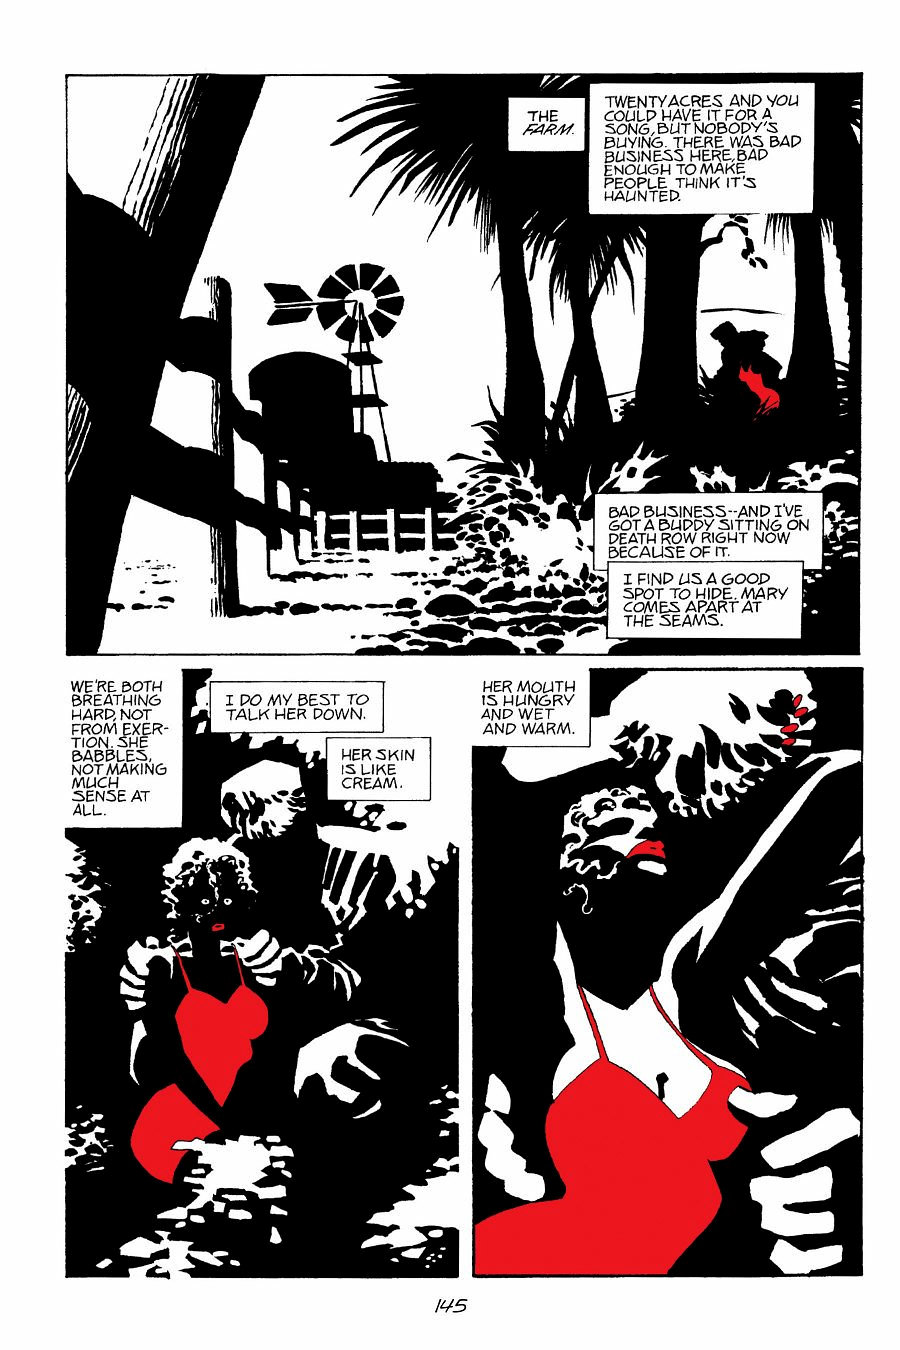 page 145 of sin city 6 booze broads and bullets